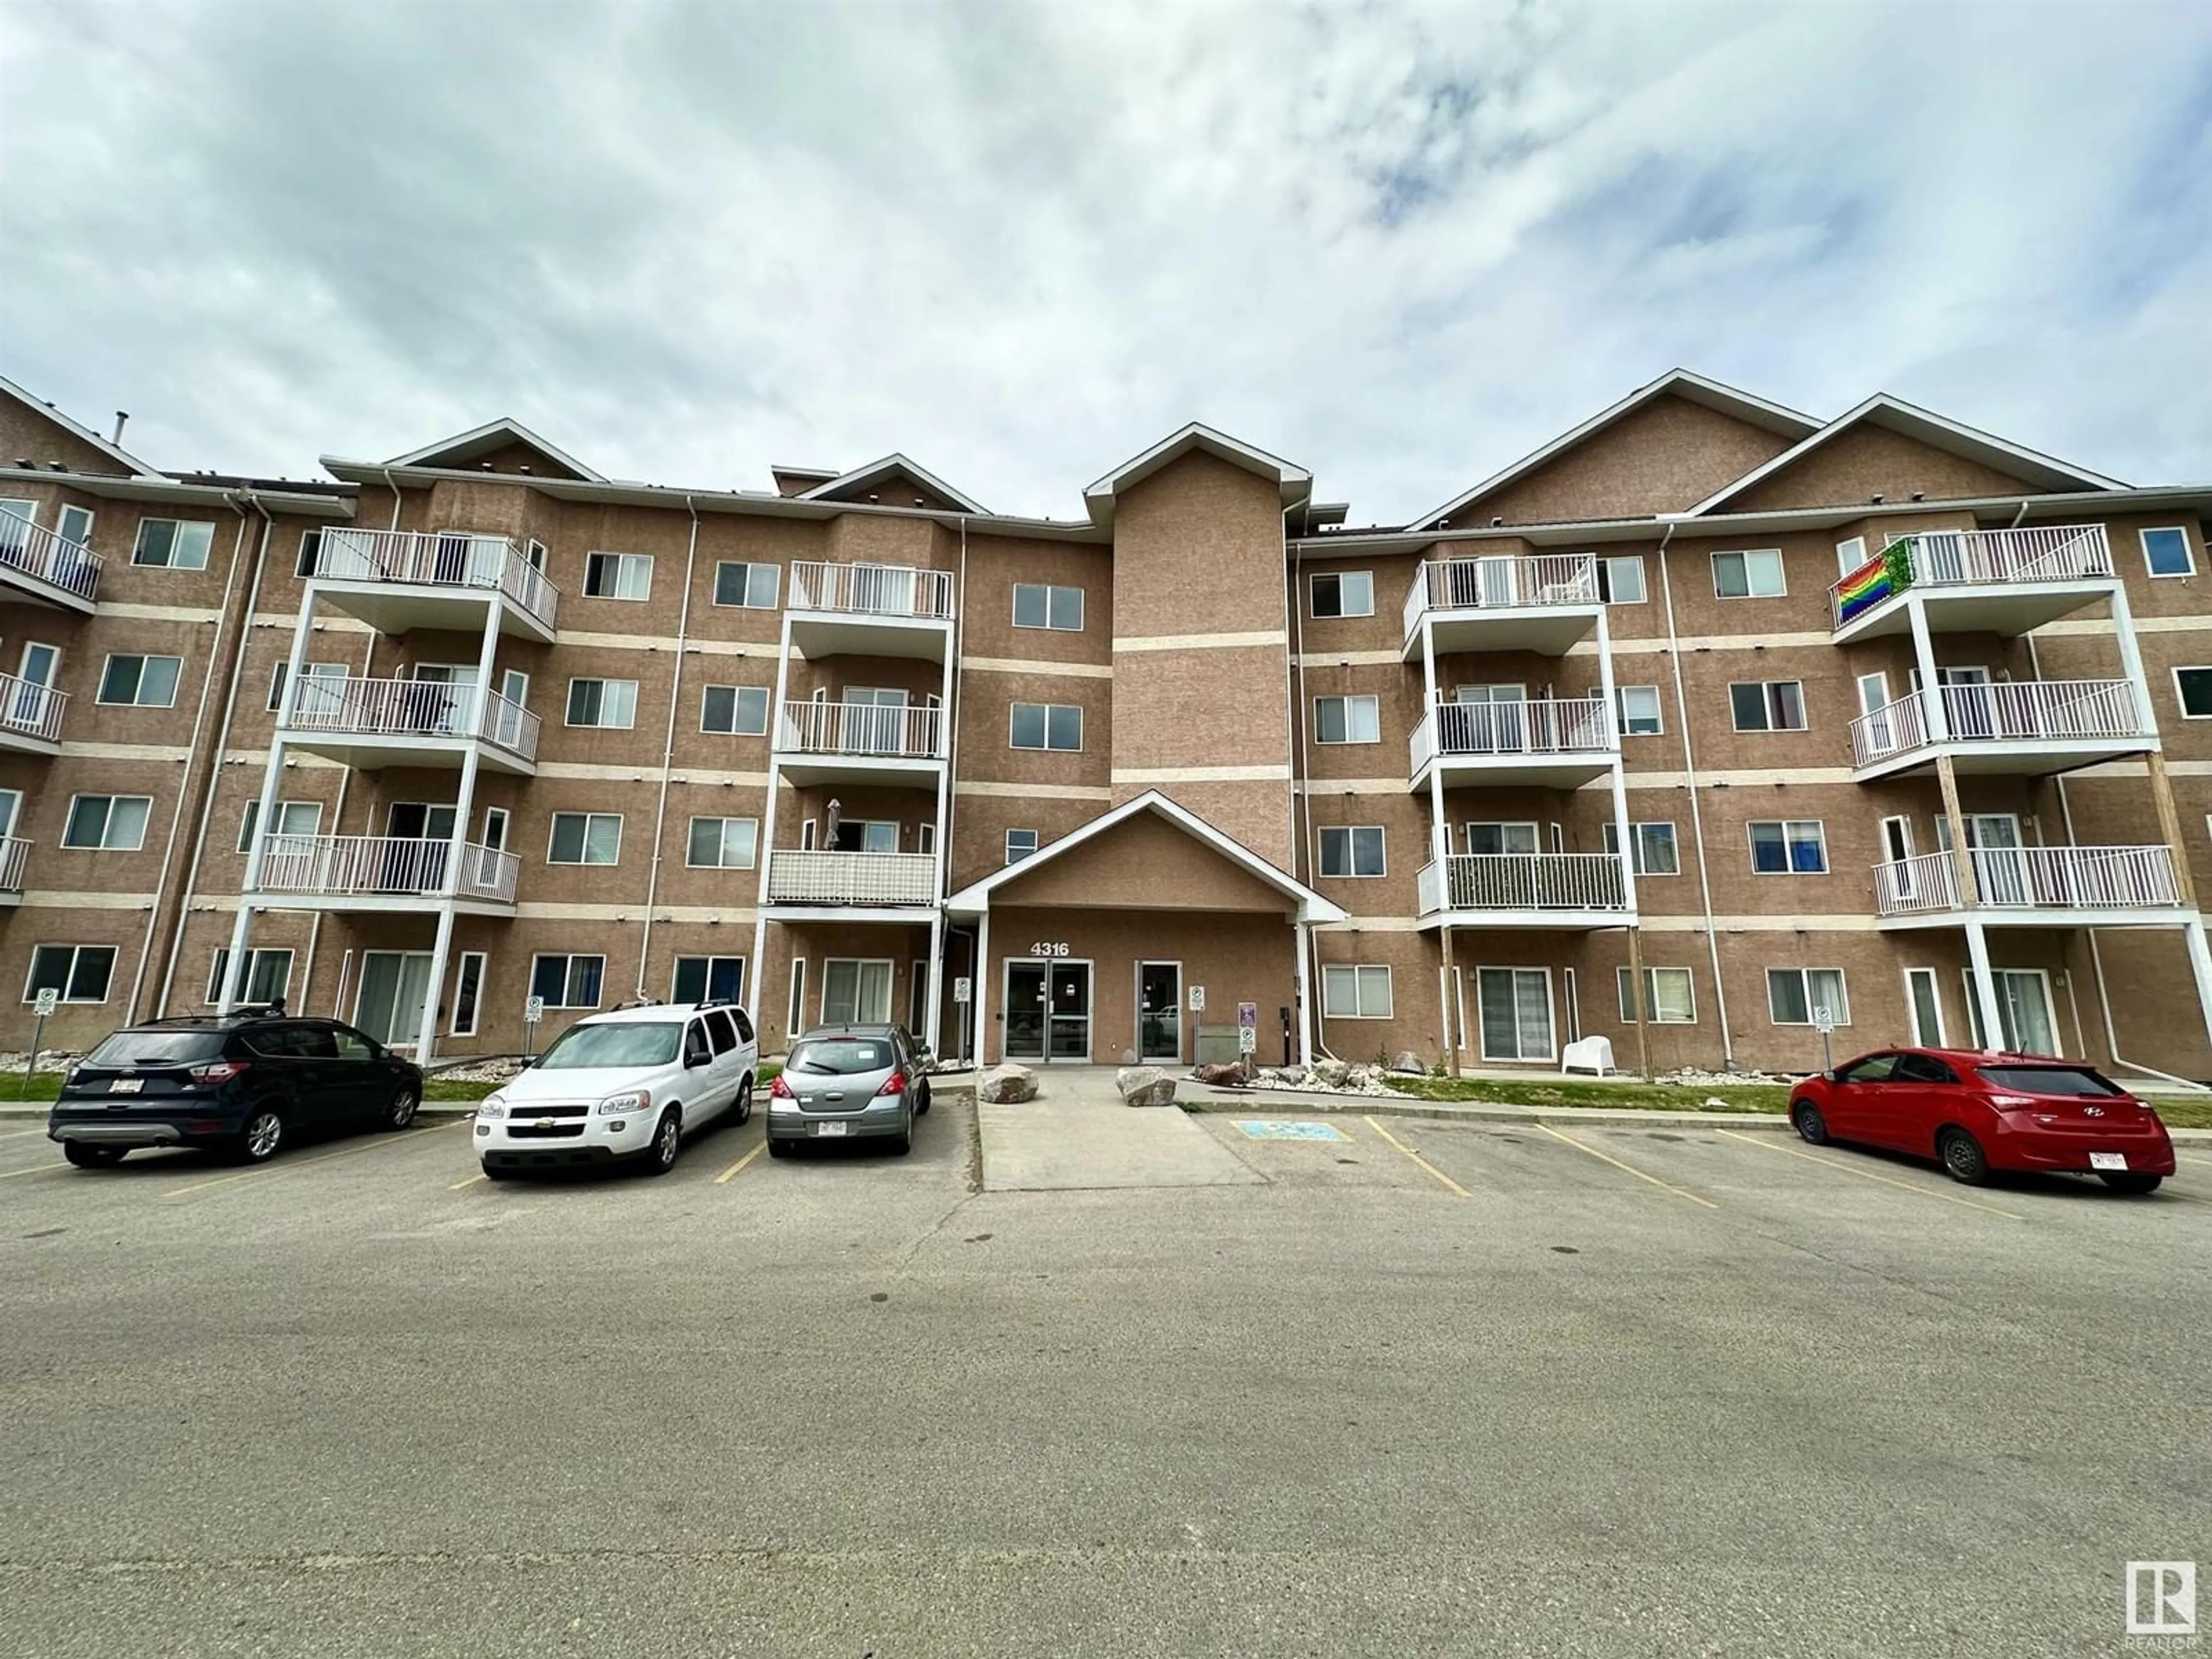 A pic from exterior of the house or condo for #315 4316 139 AV NW, Edmonton Alberta T5Y0L1